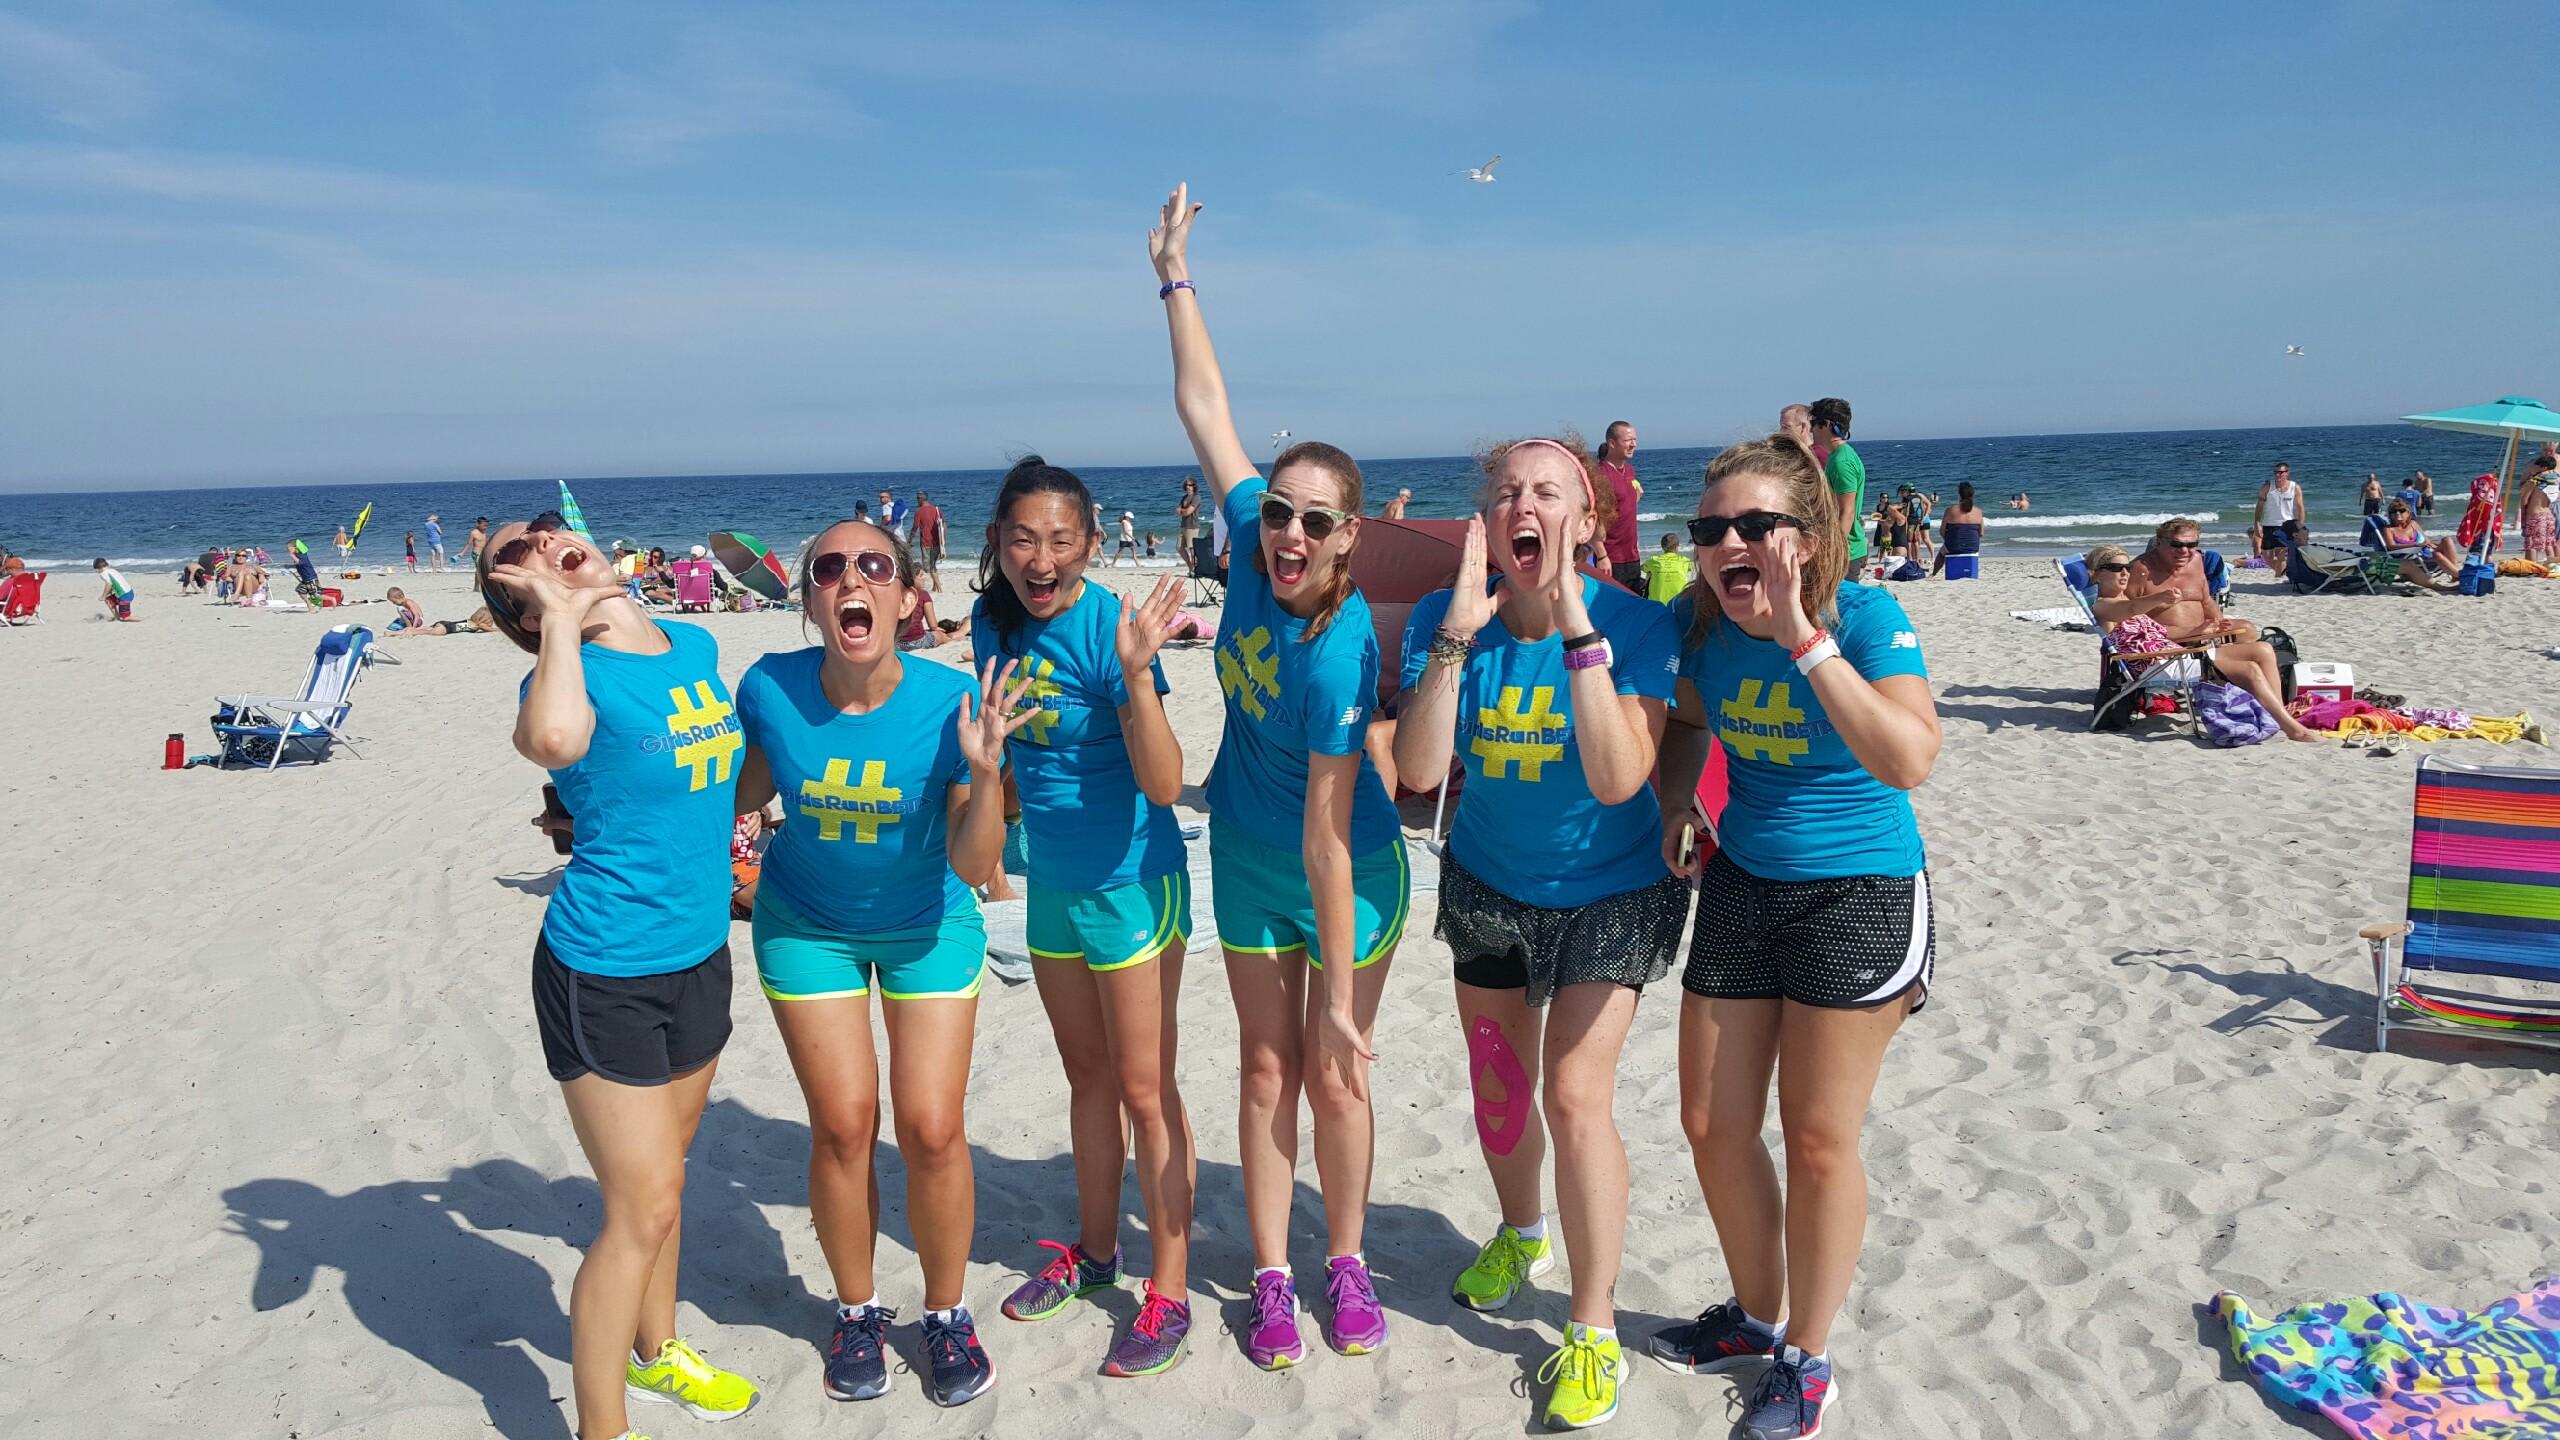 Ragnar Relay Reach The Beach 2022 Running in Jefferson — Let’s Do This